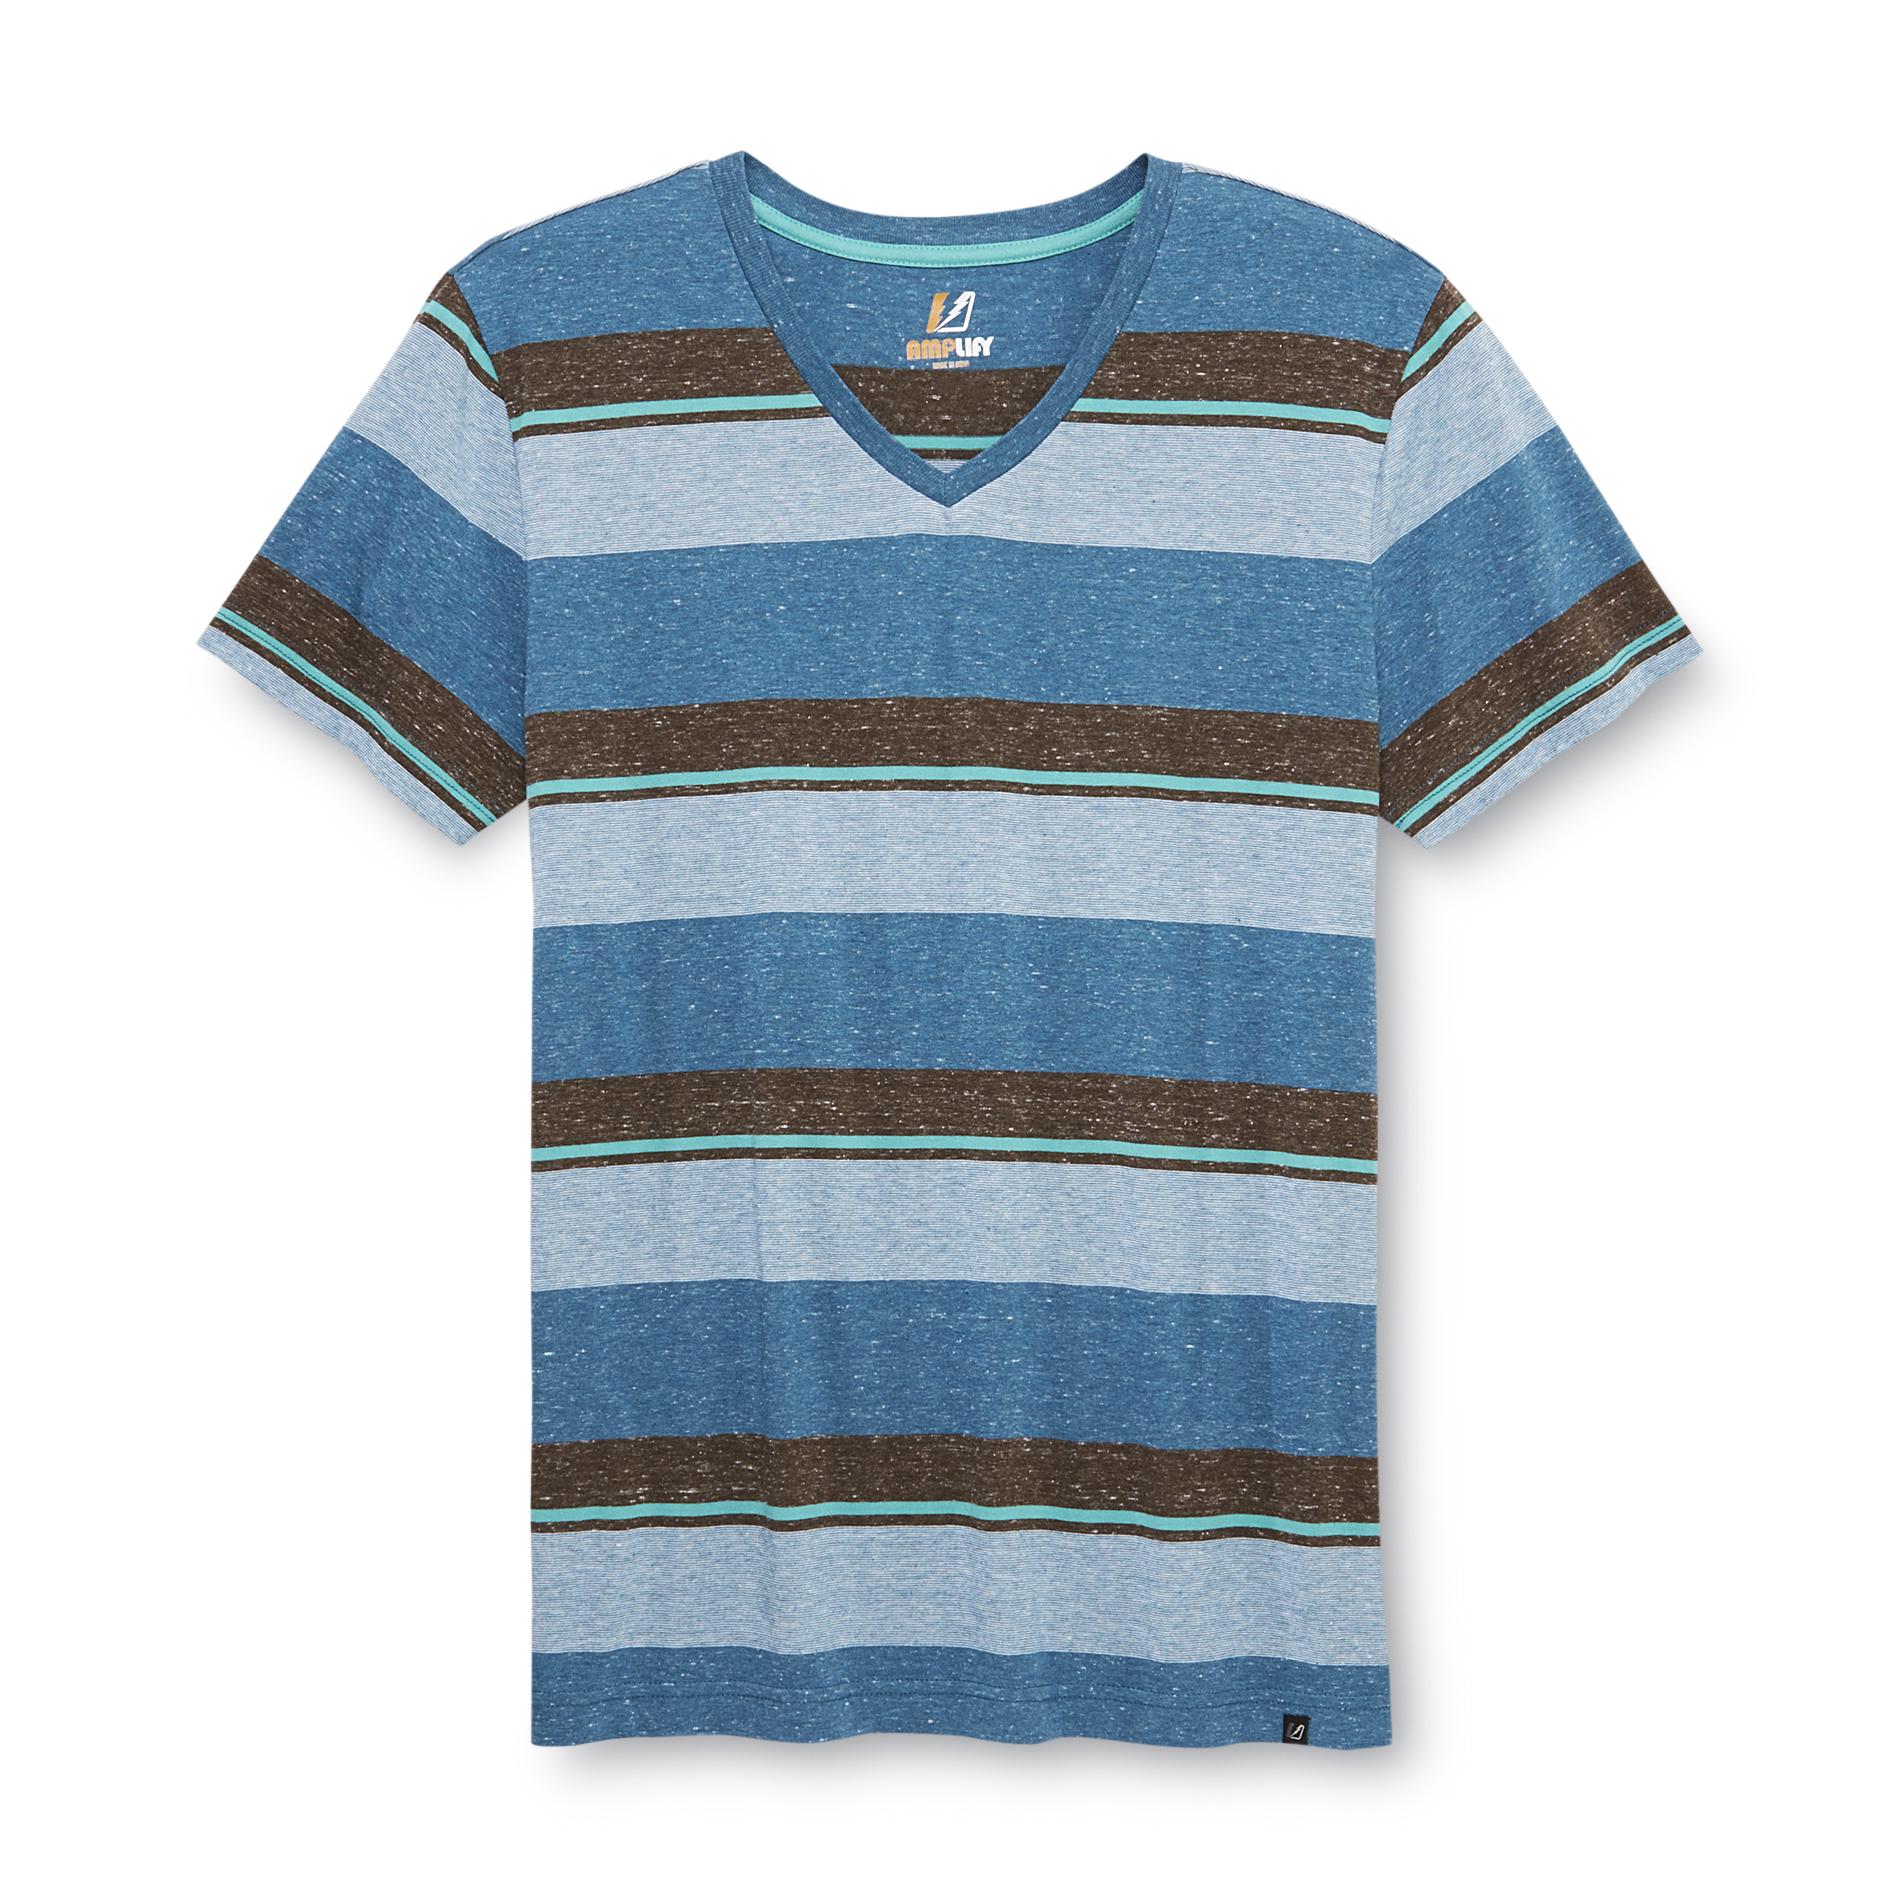 Amplify Young Men's Heathered V-Neck T-Shirt - Striped